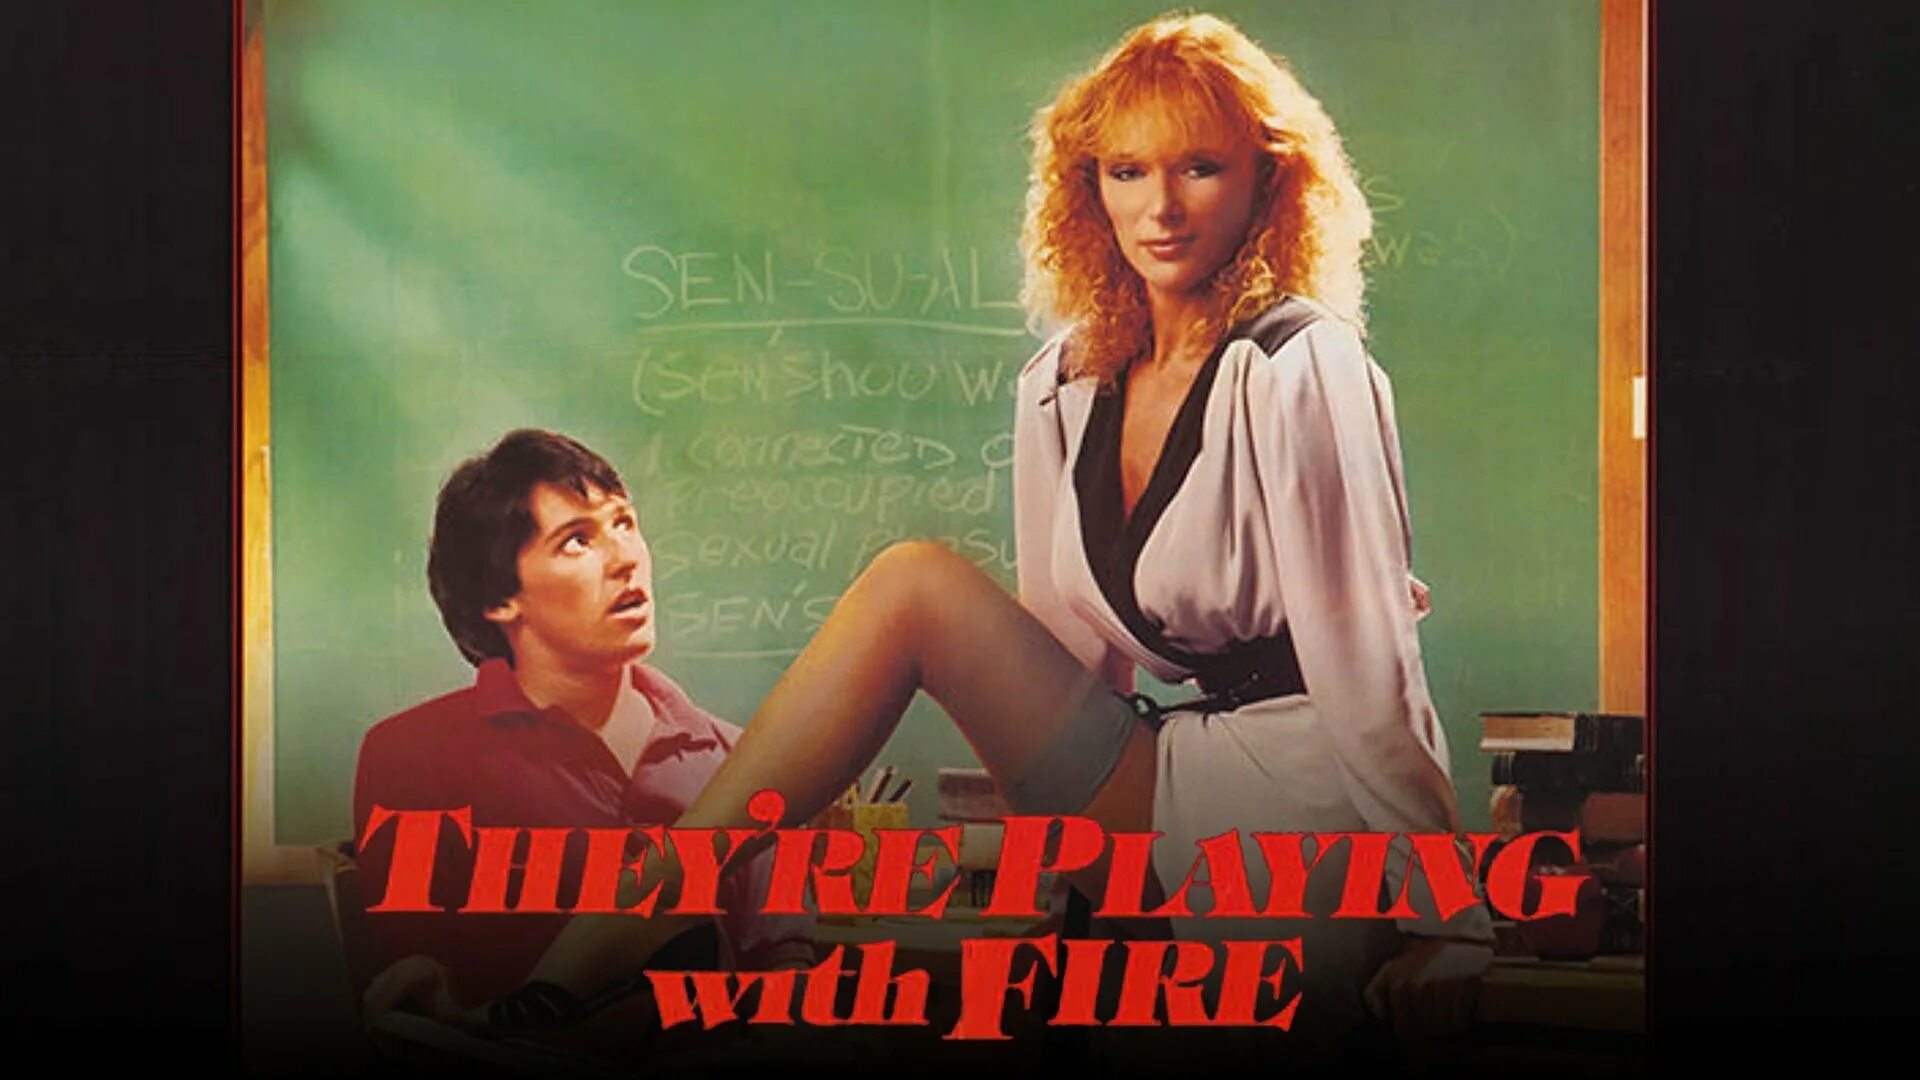 Частные уроки 2 1994. Сибил Даннинг they're playing with Fire. They're playing with Fire 1984.